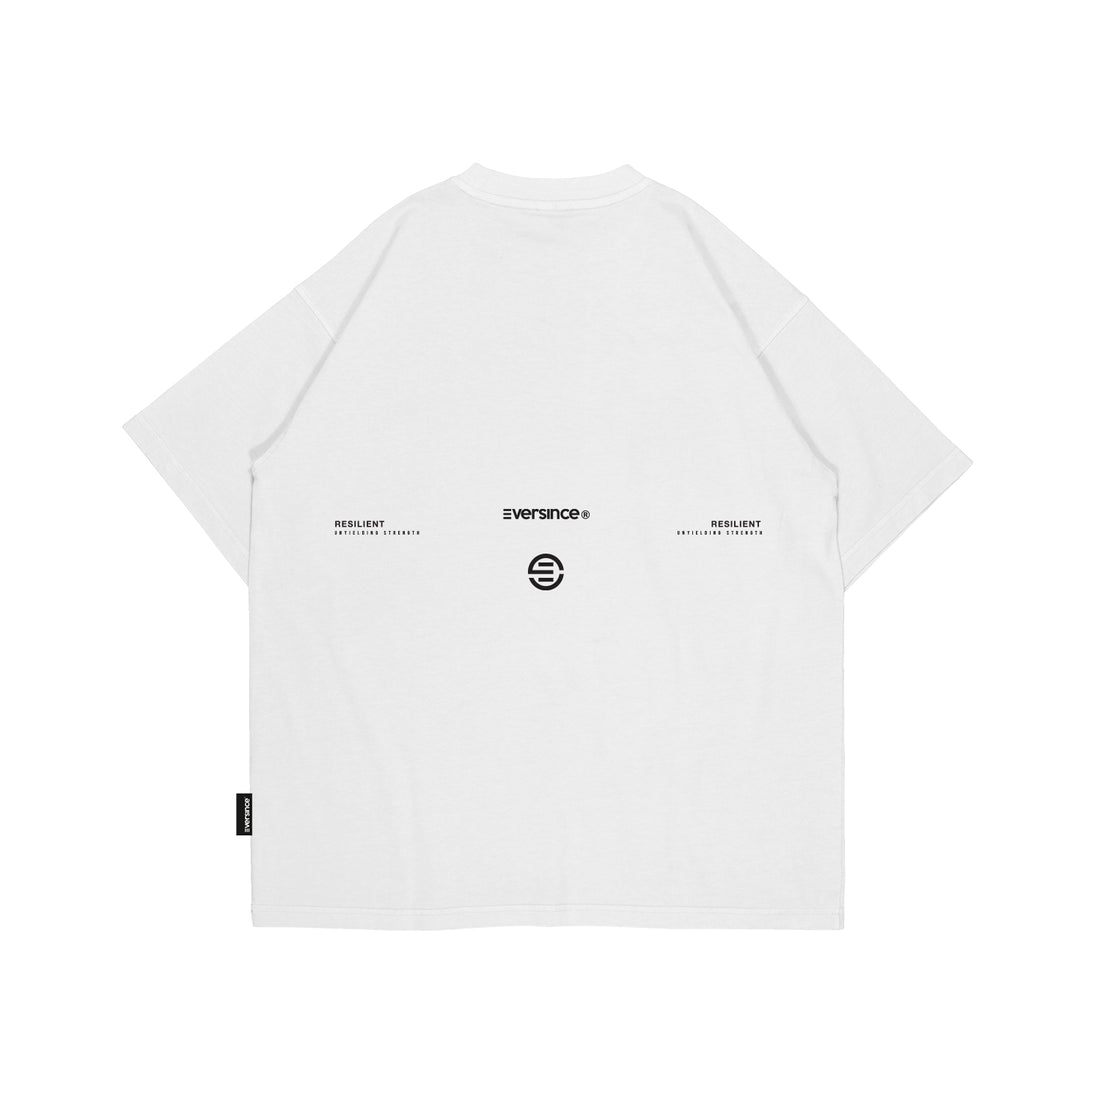 Eversince | Resilient Tee White